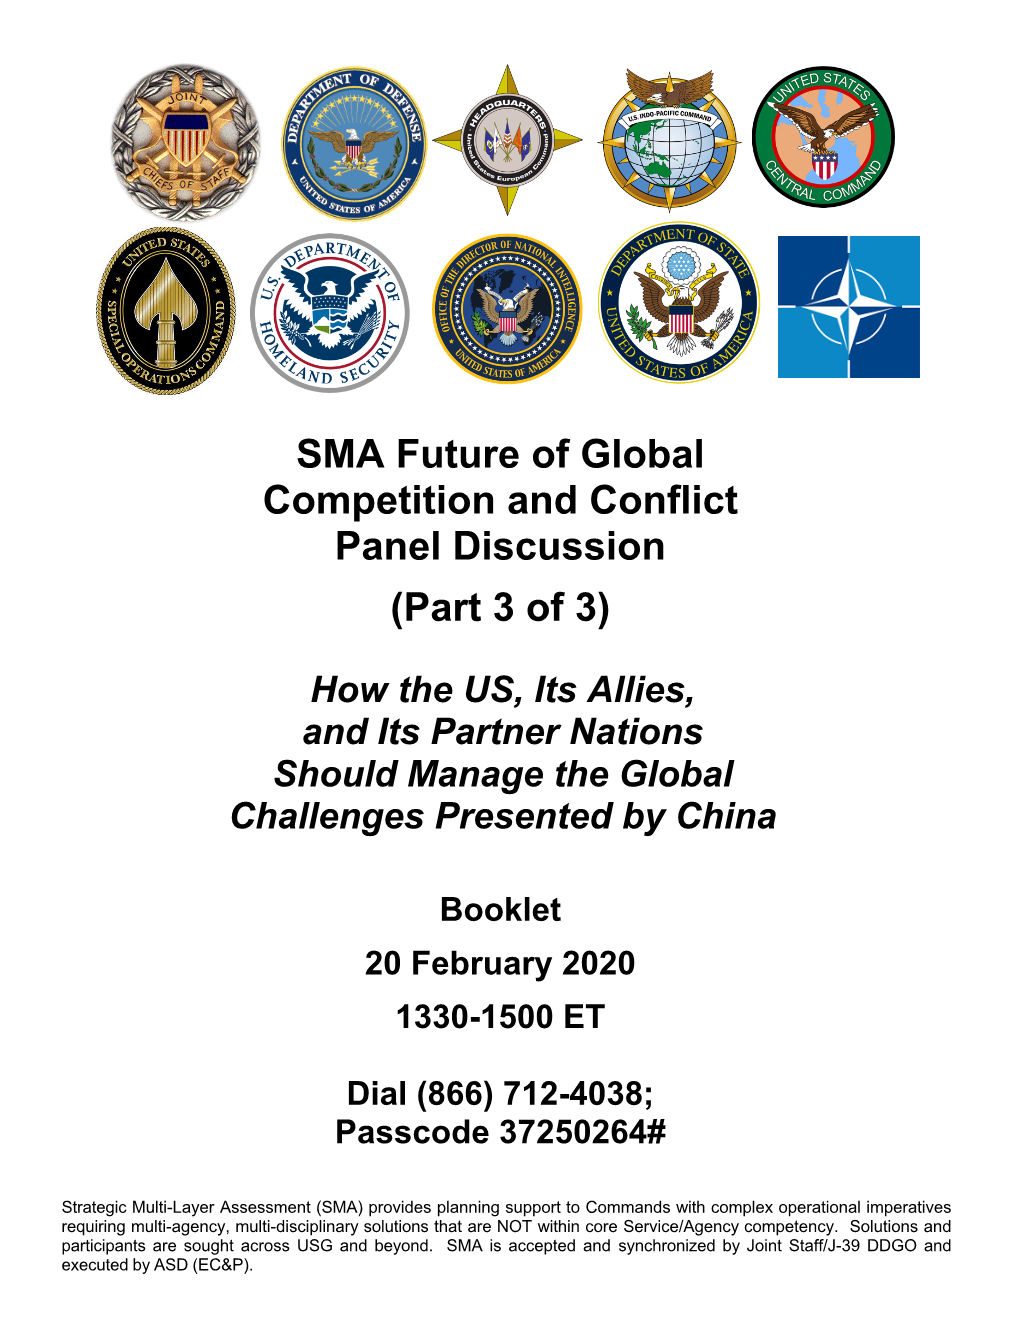 SMA Future of Global Competition and Conflict Panel Discussion (Part 3 of 3)